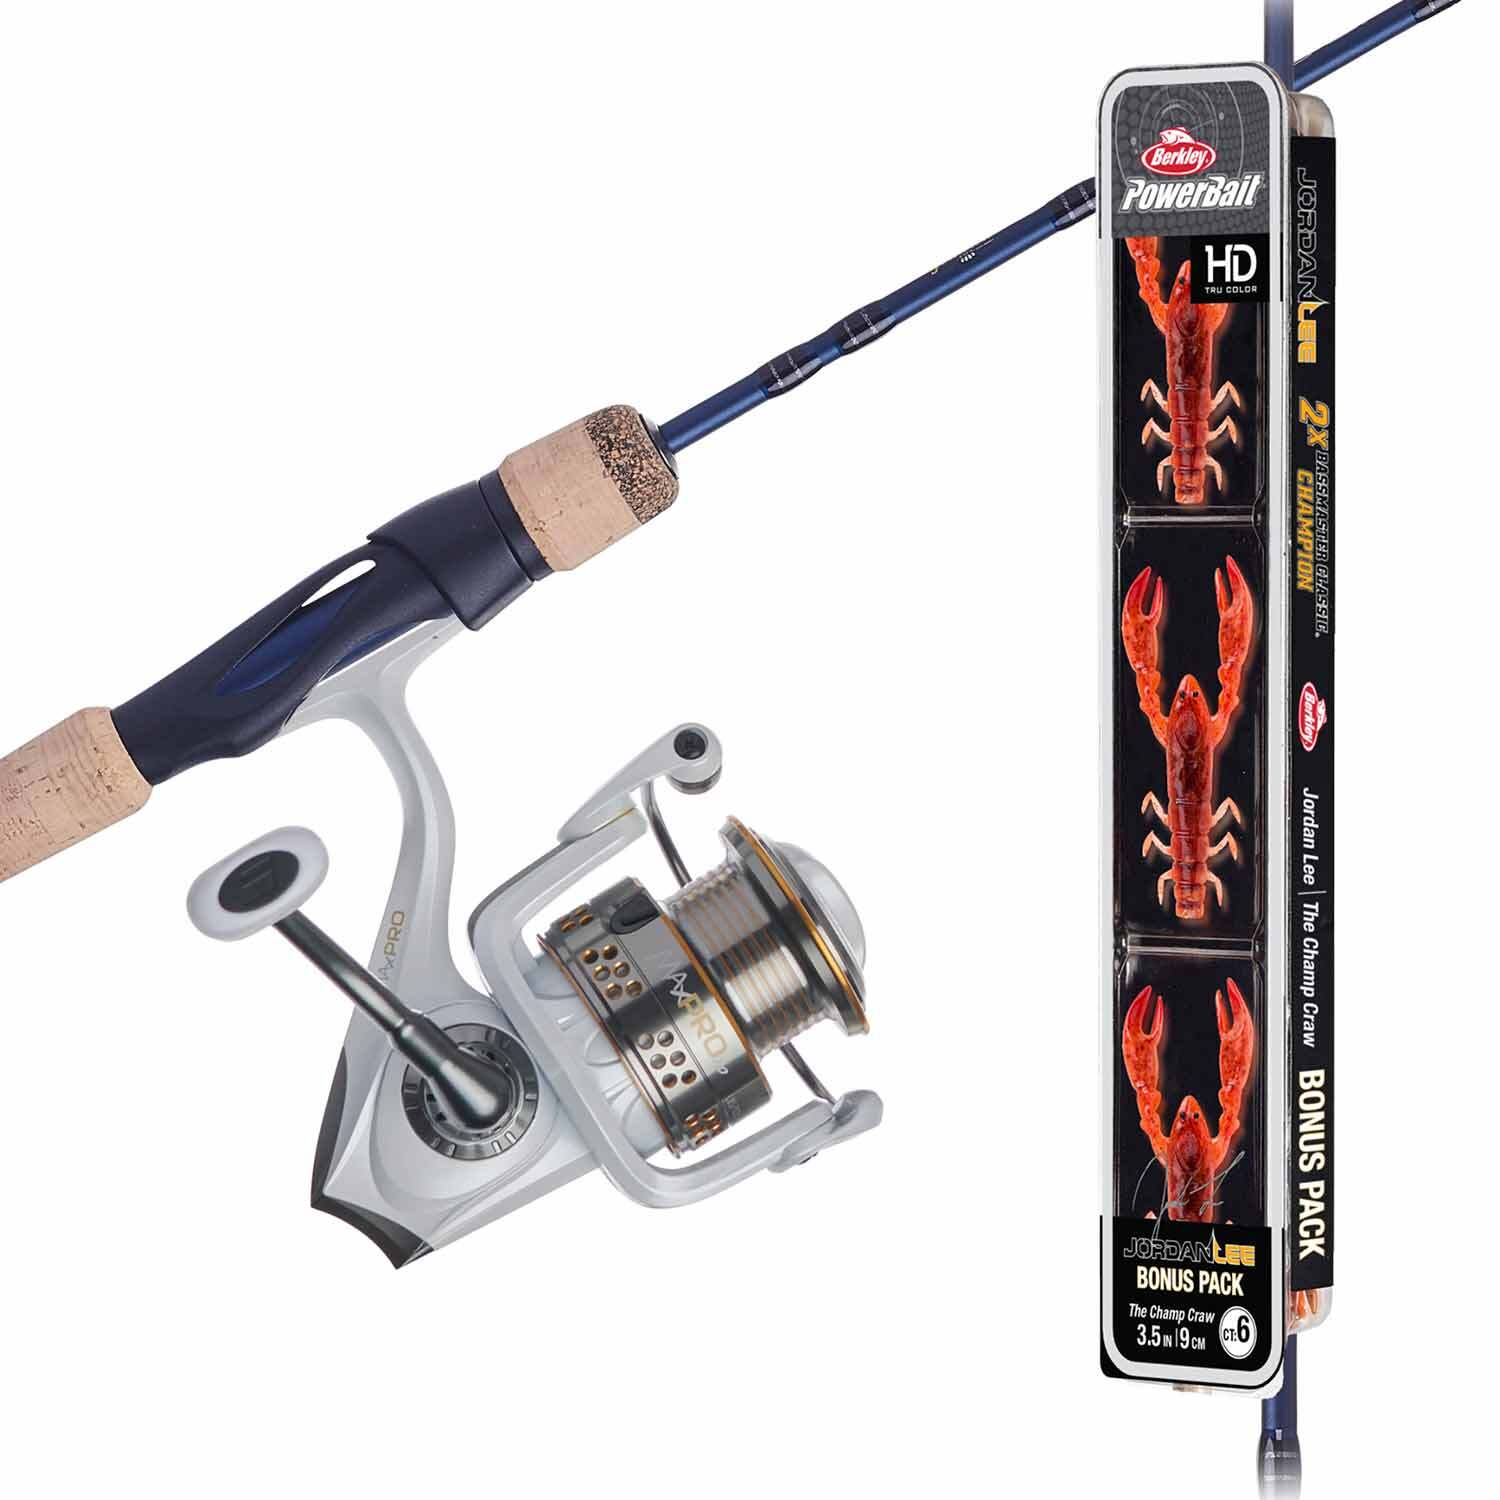  Abu Garcia 7' Jordan Lee Fishing Rod and Reel Baitcast Combo,  5 +1 Ball Bearings with Lightweight Graphite Frame & Sideplates, Durable  Construction,Yellow/Grey : Sports & Outdoors